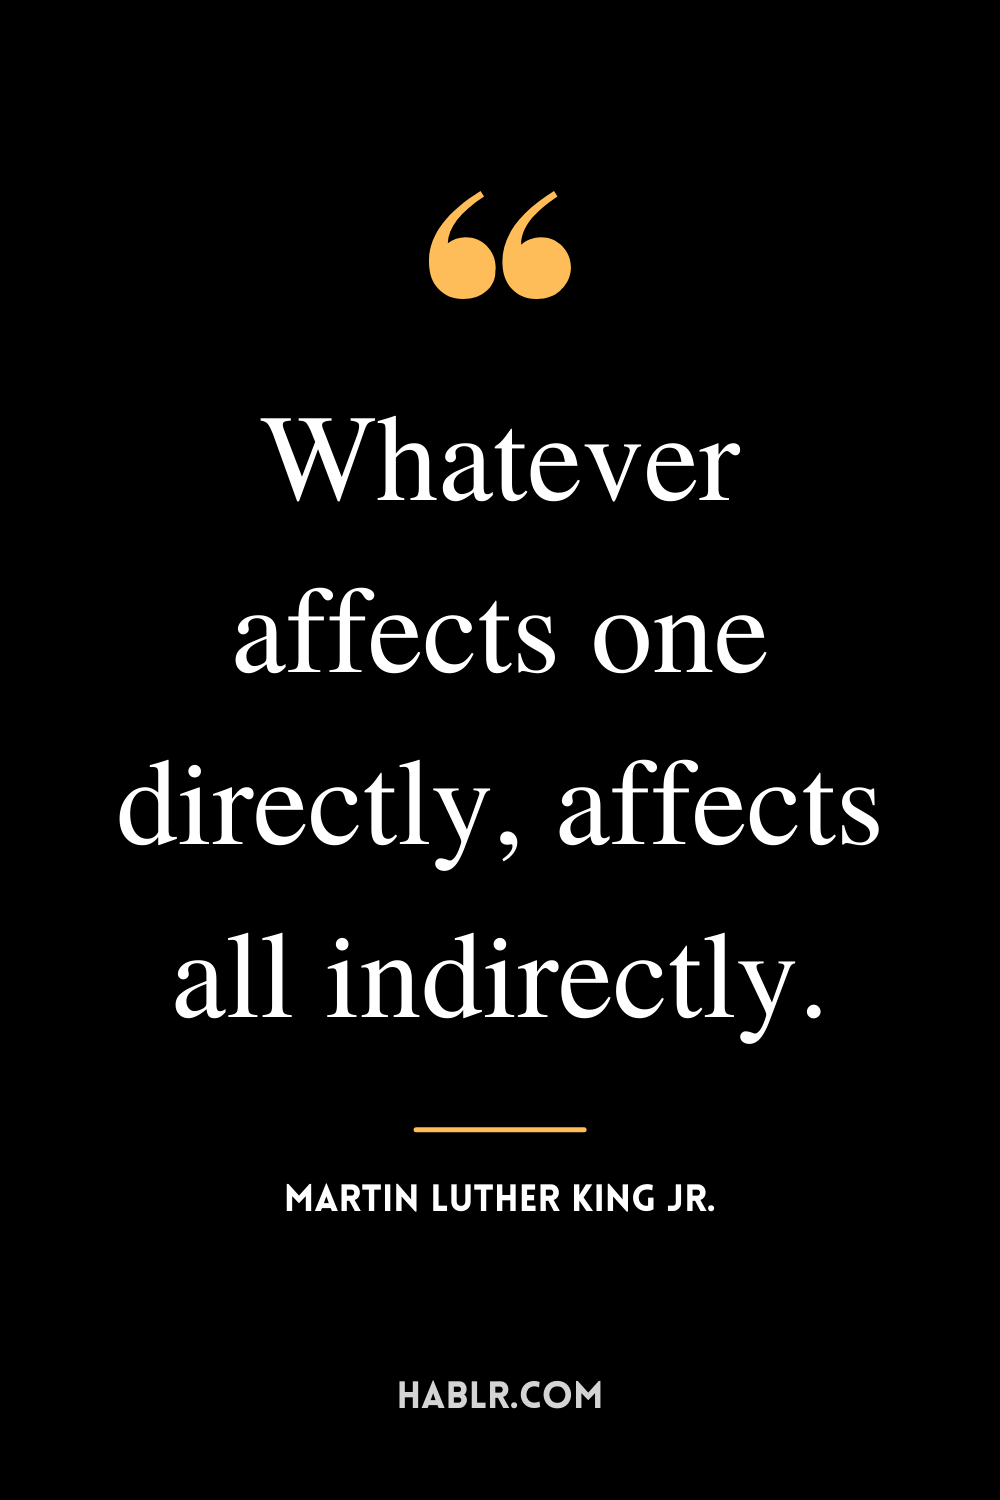 "Whatever affects one directly, affects all indirectly." -Martin Luther King Jr.